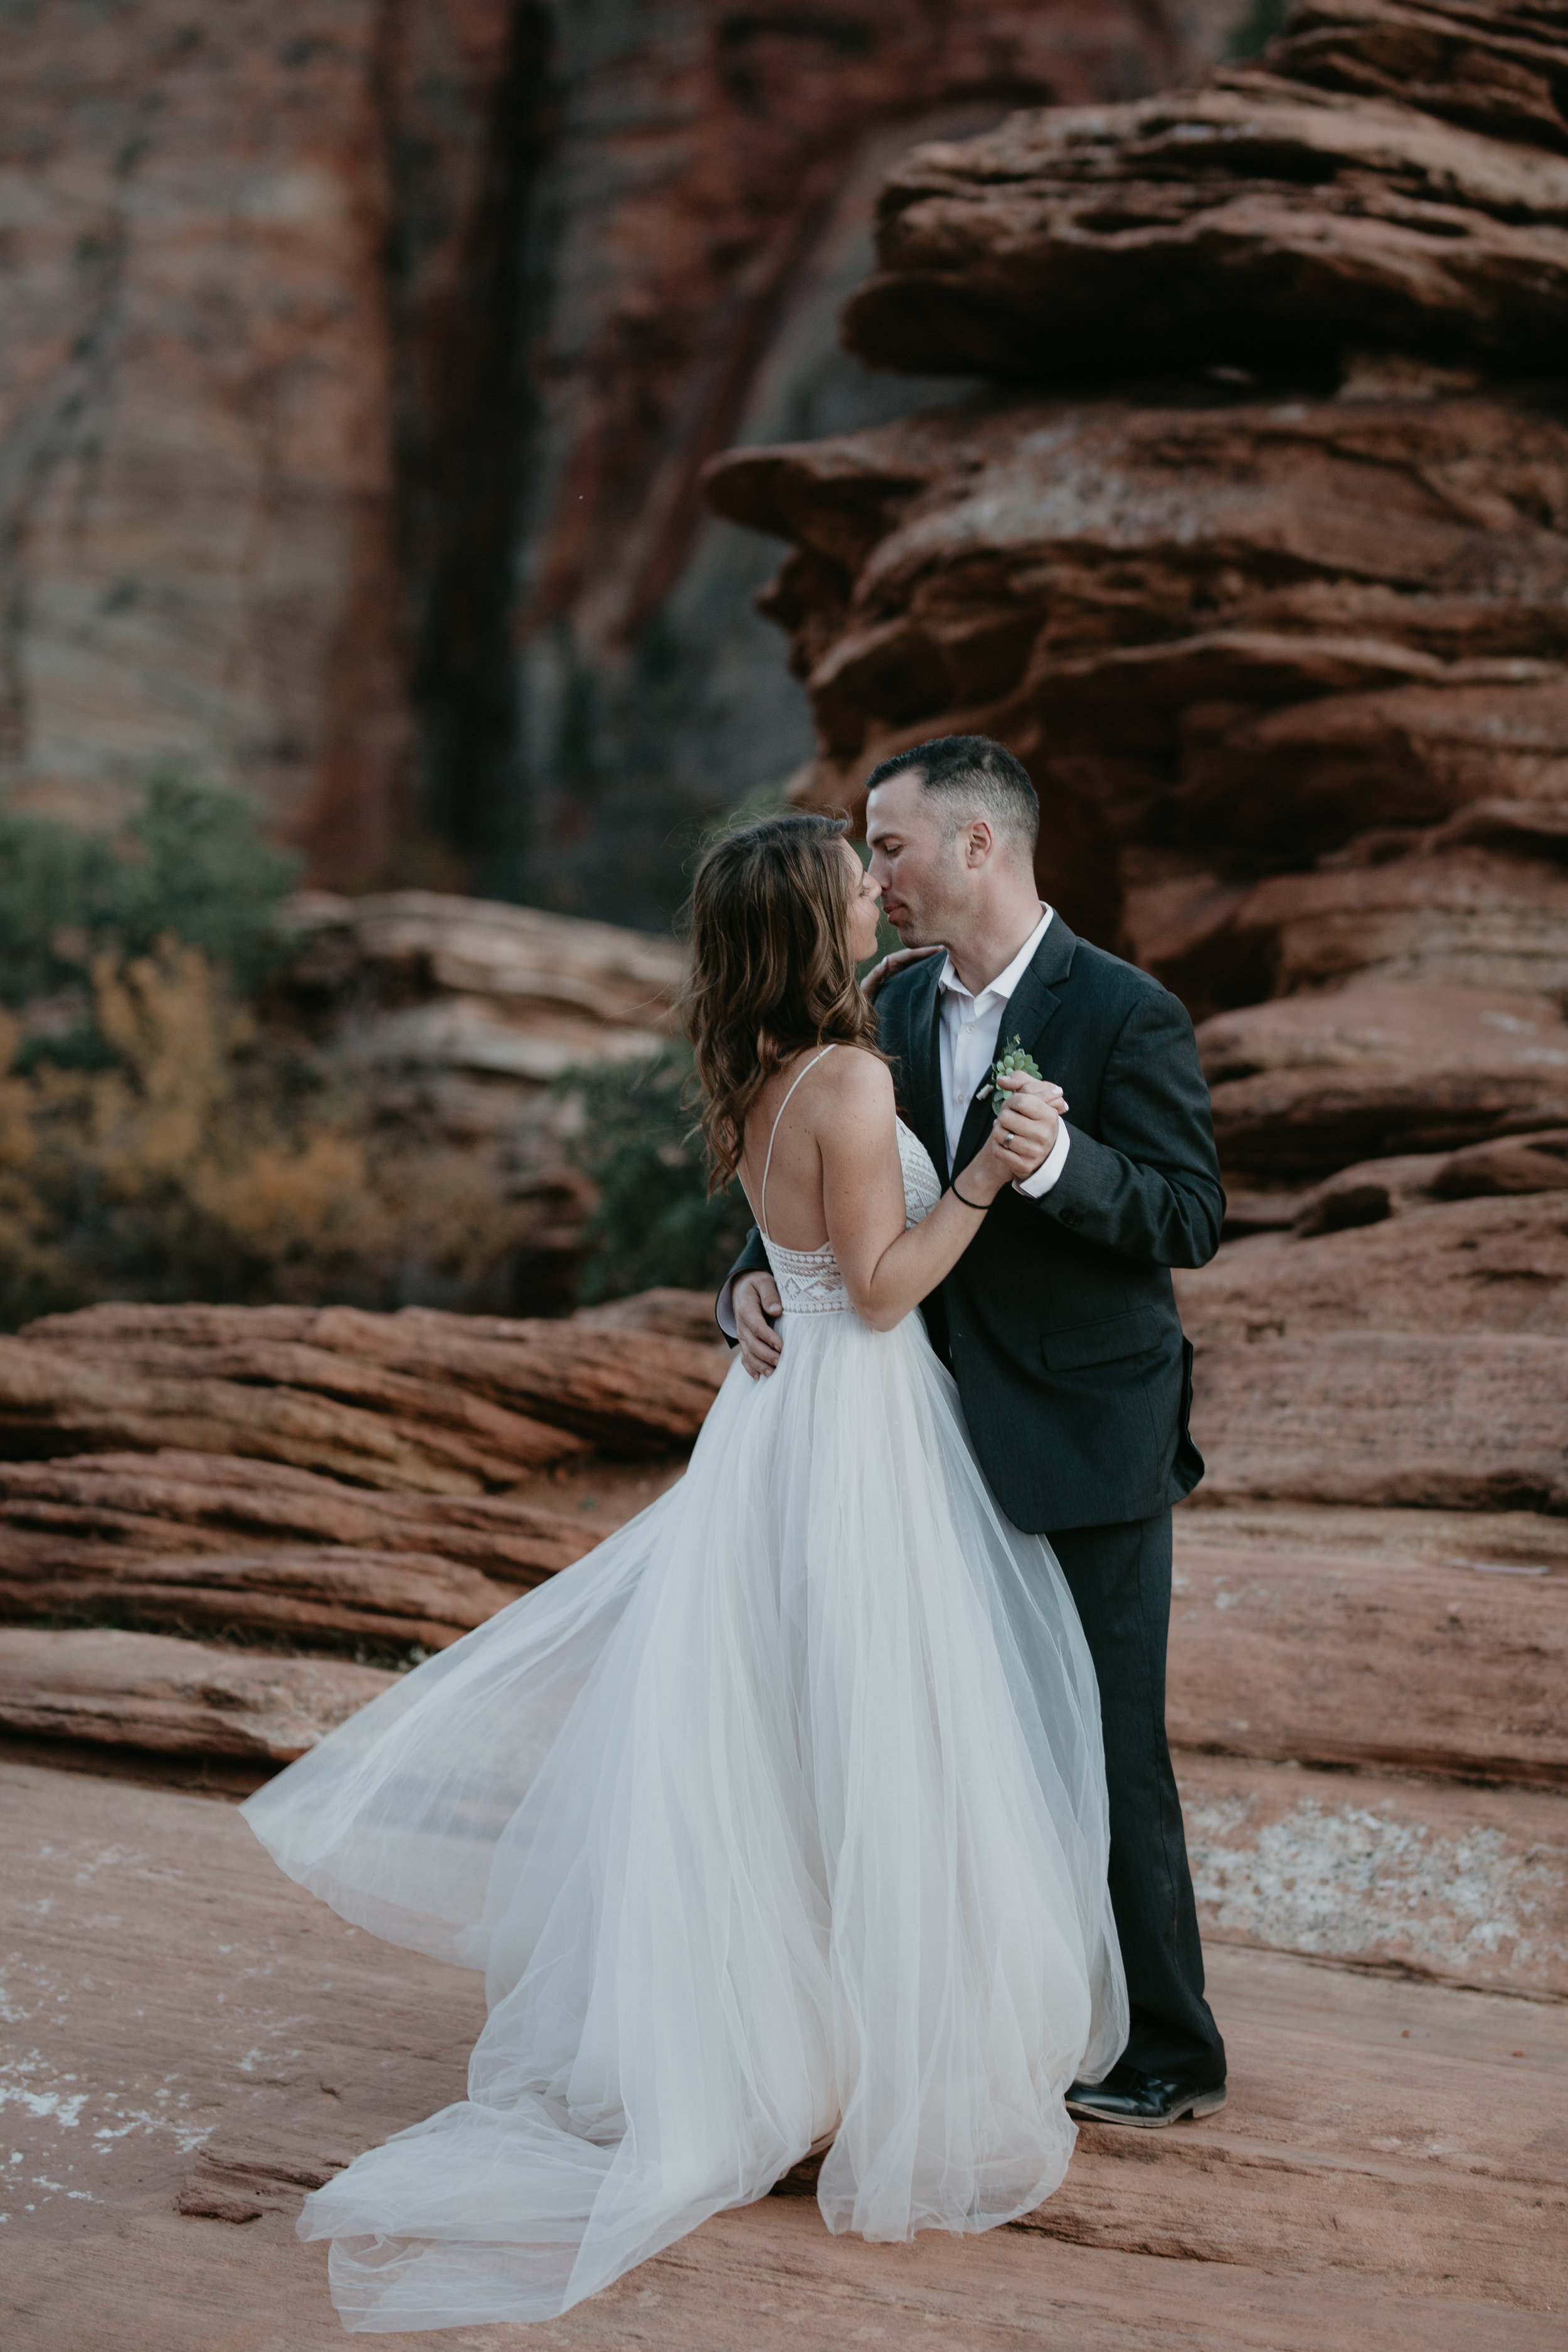 nicole-daacke-photography-zion-national-park-elopement-photographer-canyon-overlook-trail-elope-hiking-adventure-wedding-photos-fall-utah-red-rock-canyon-stgeorge-eloping-photographer-86.jpg